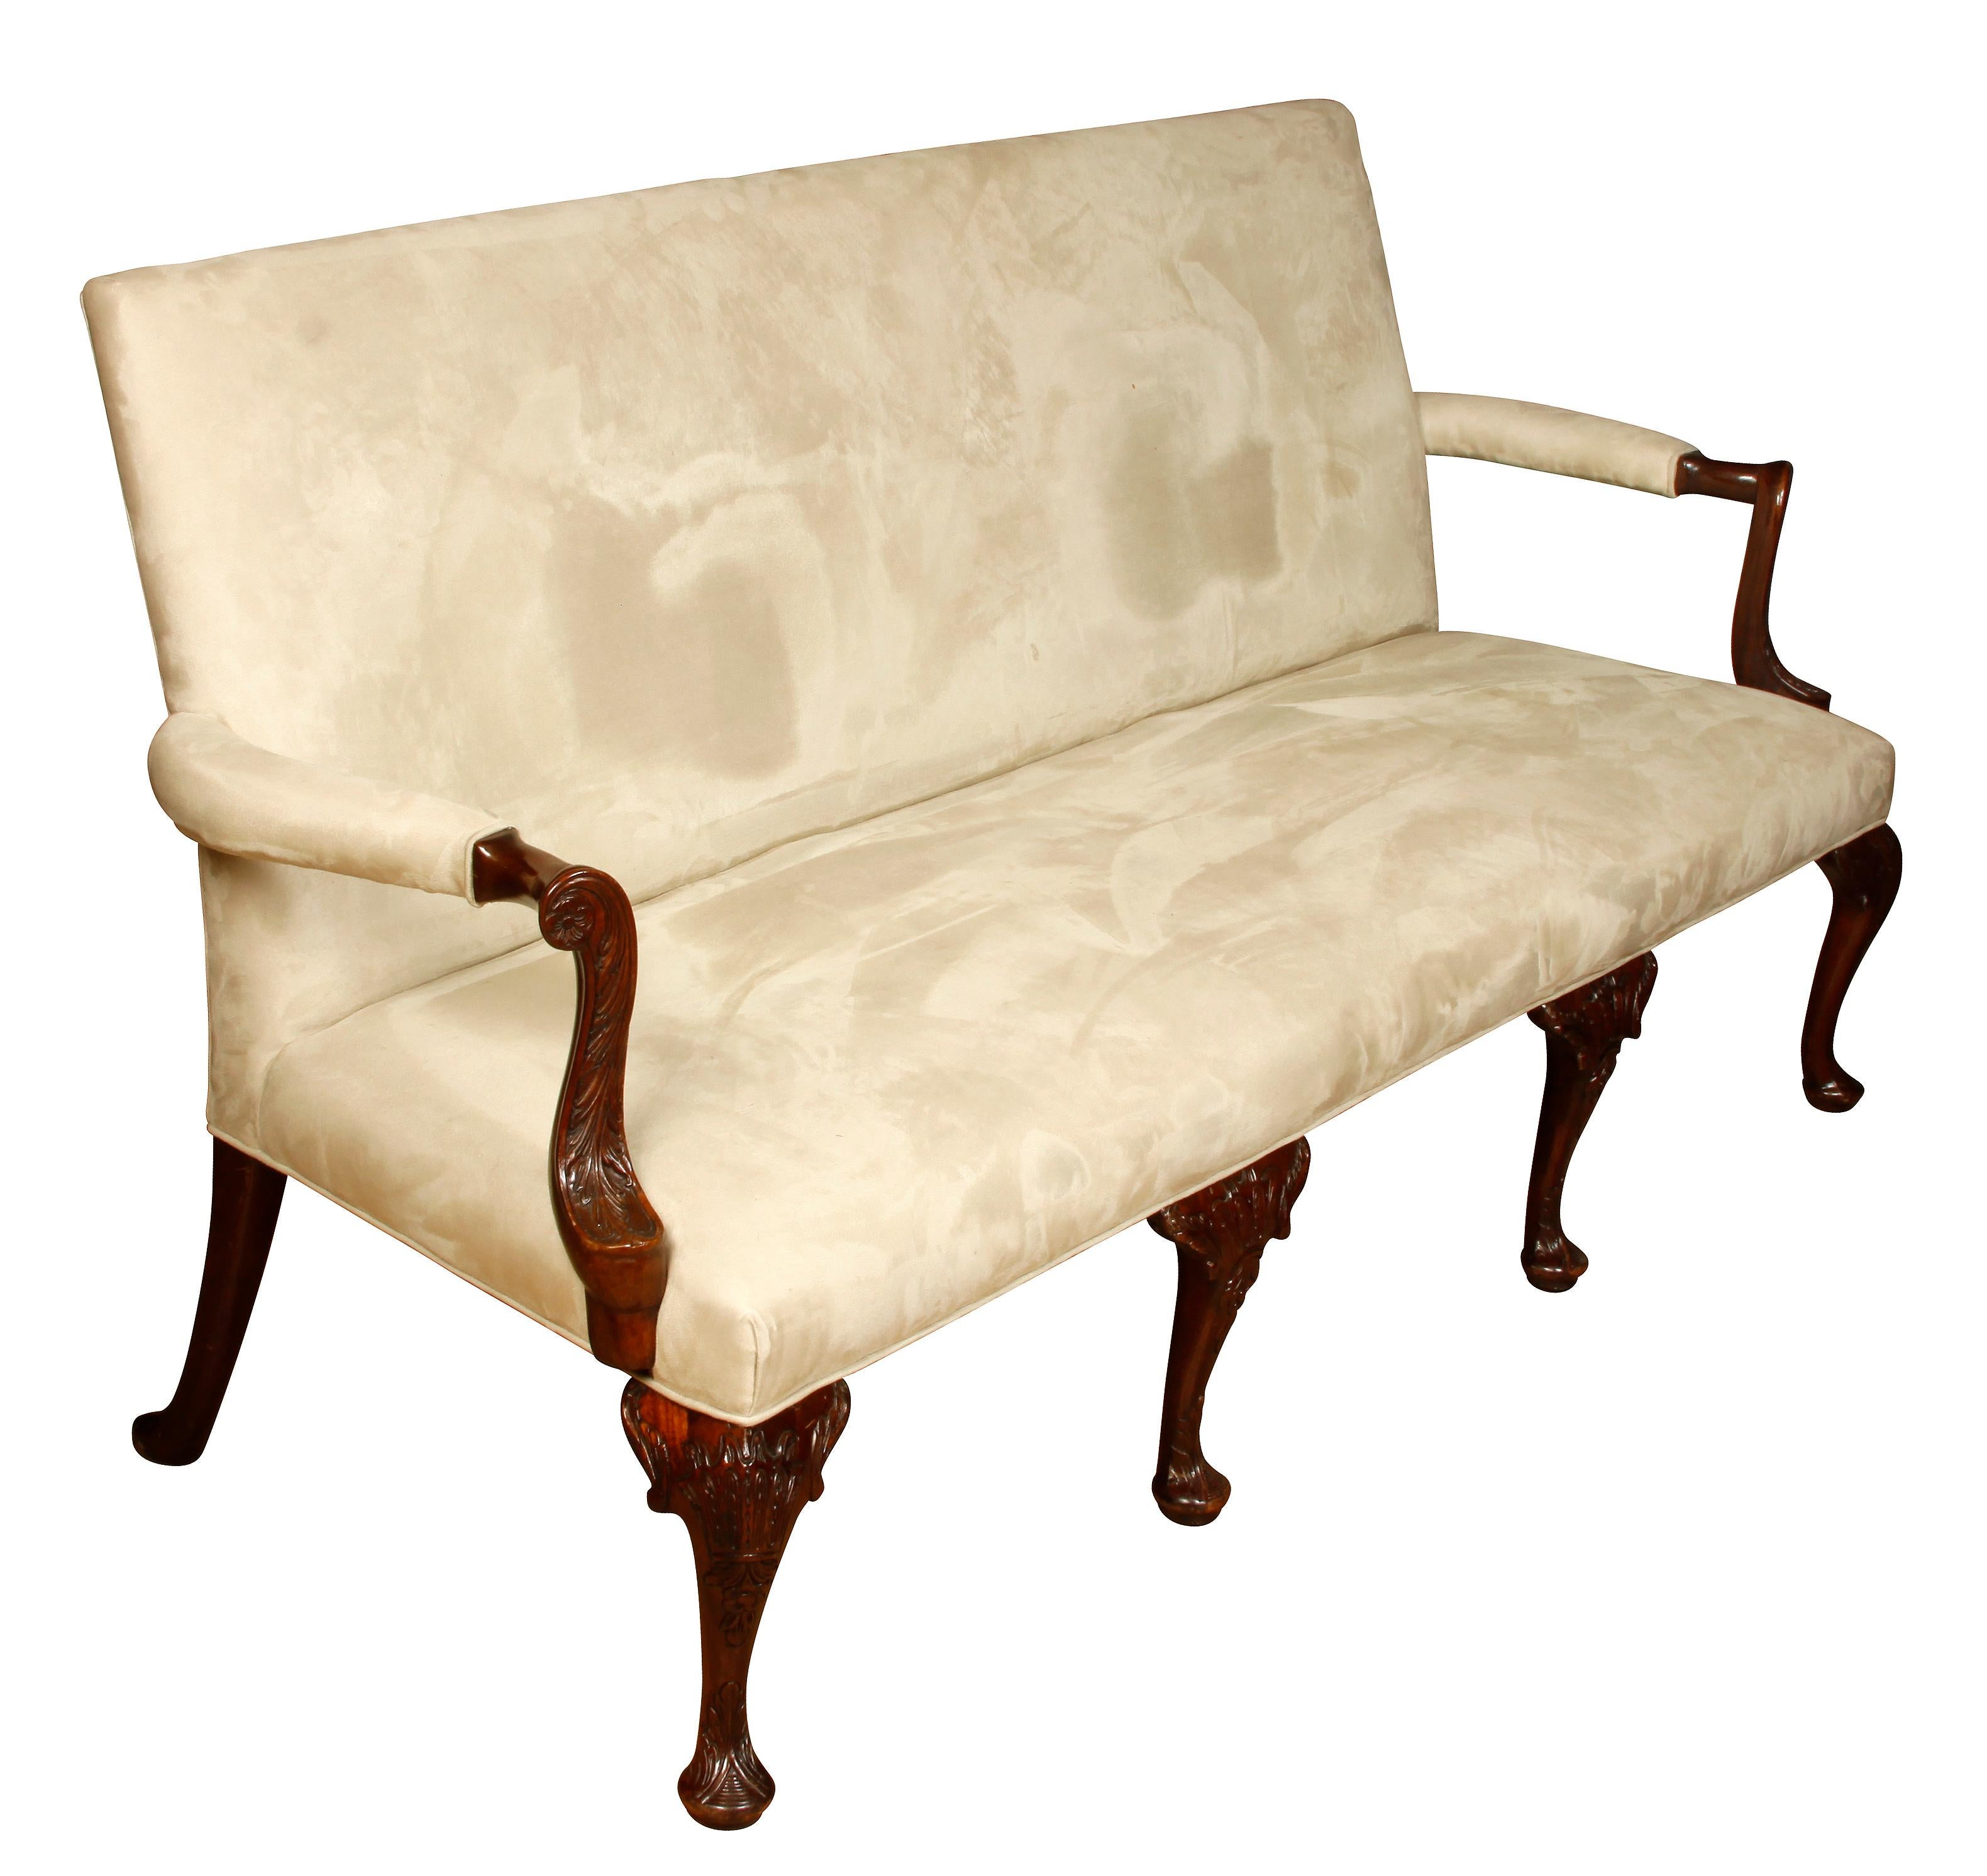 George III style mahogany settee in suede with carved arms and legs.